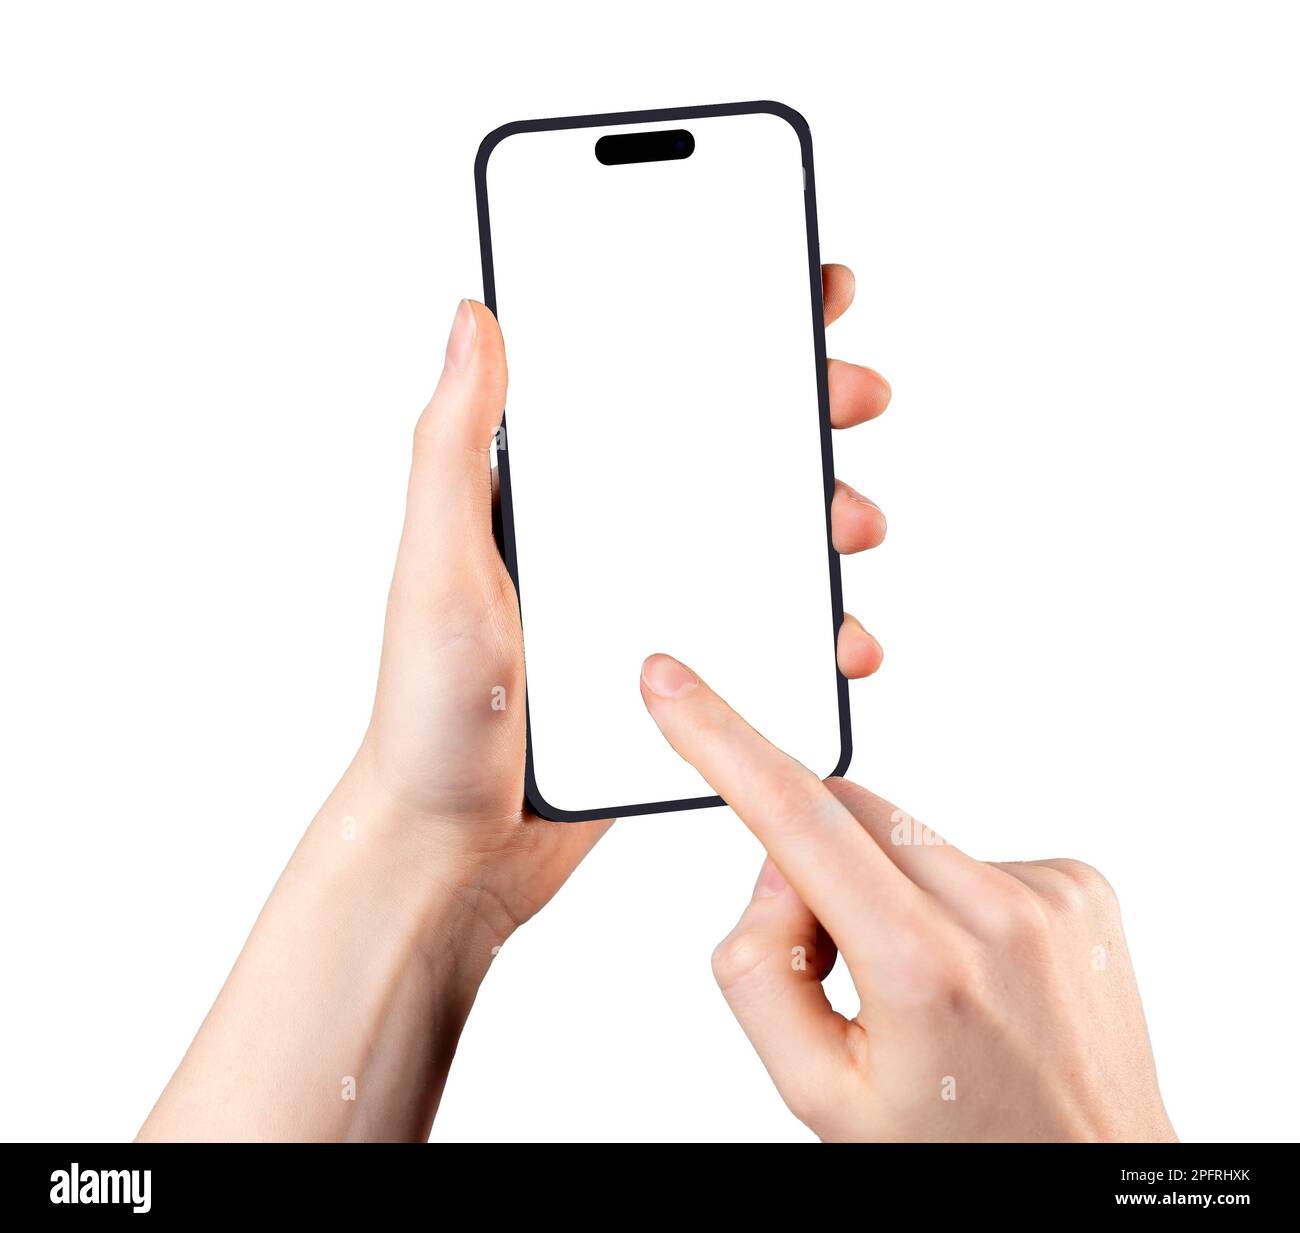 Lodz, Poland February 07 2023 Hand holding mobile phone mock-up, tapping pointing on blank smartphone display frame isolated on white background. Stock Photo